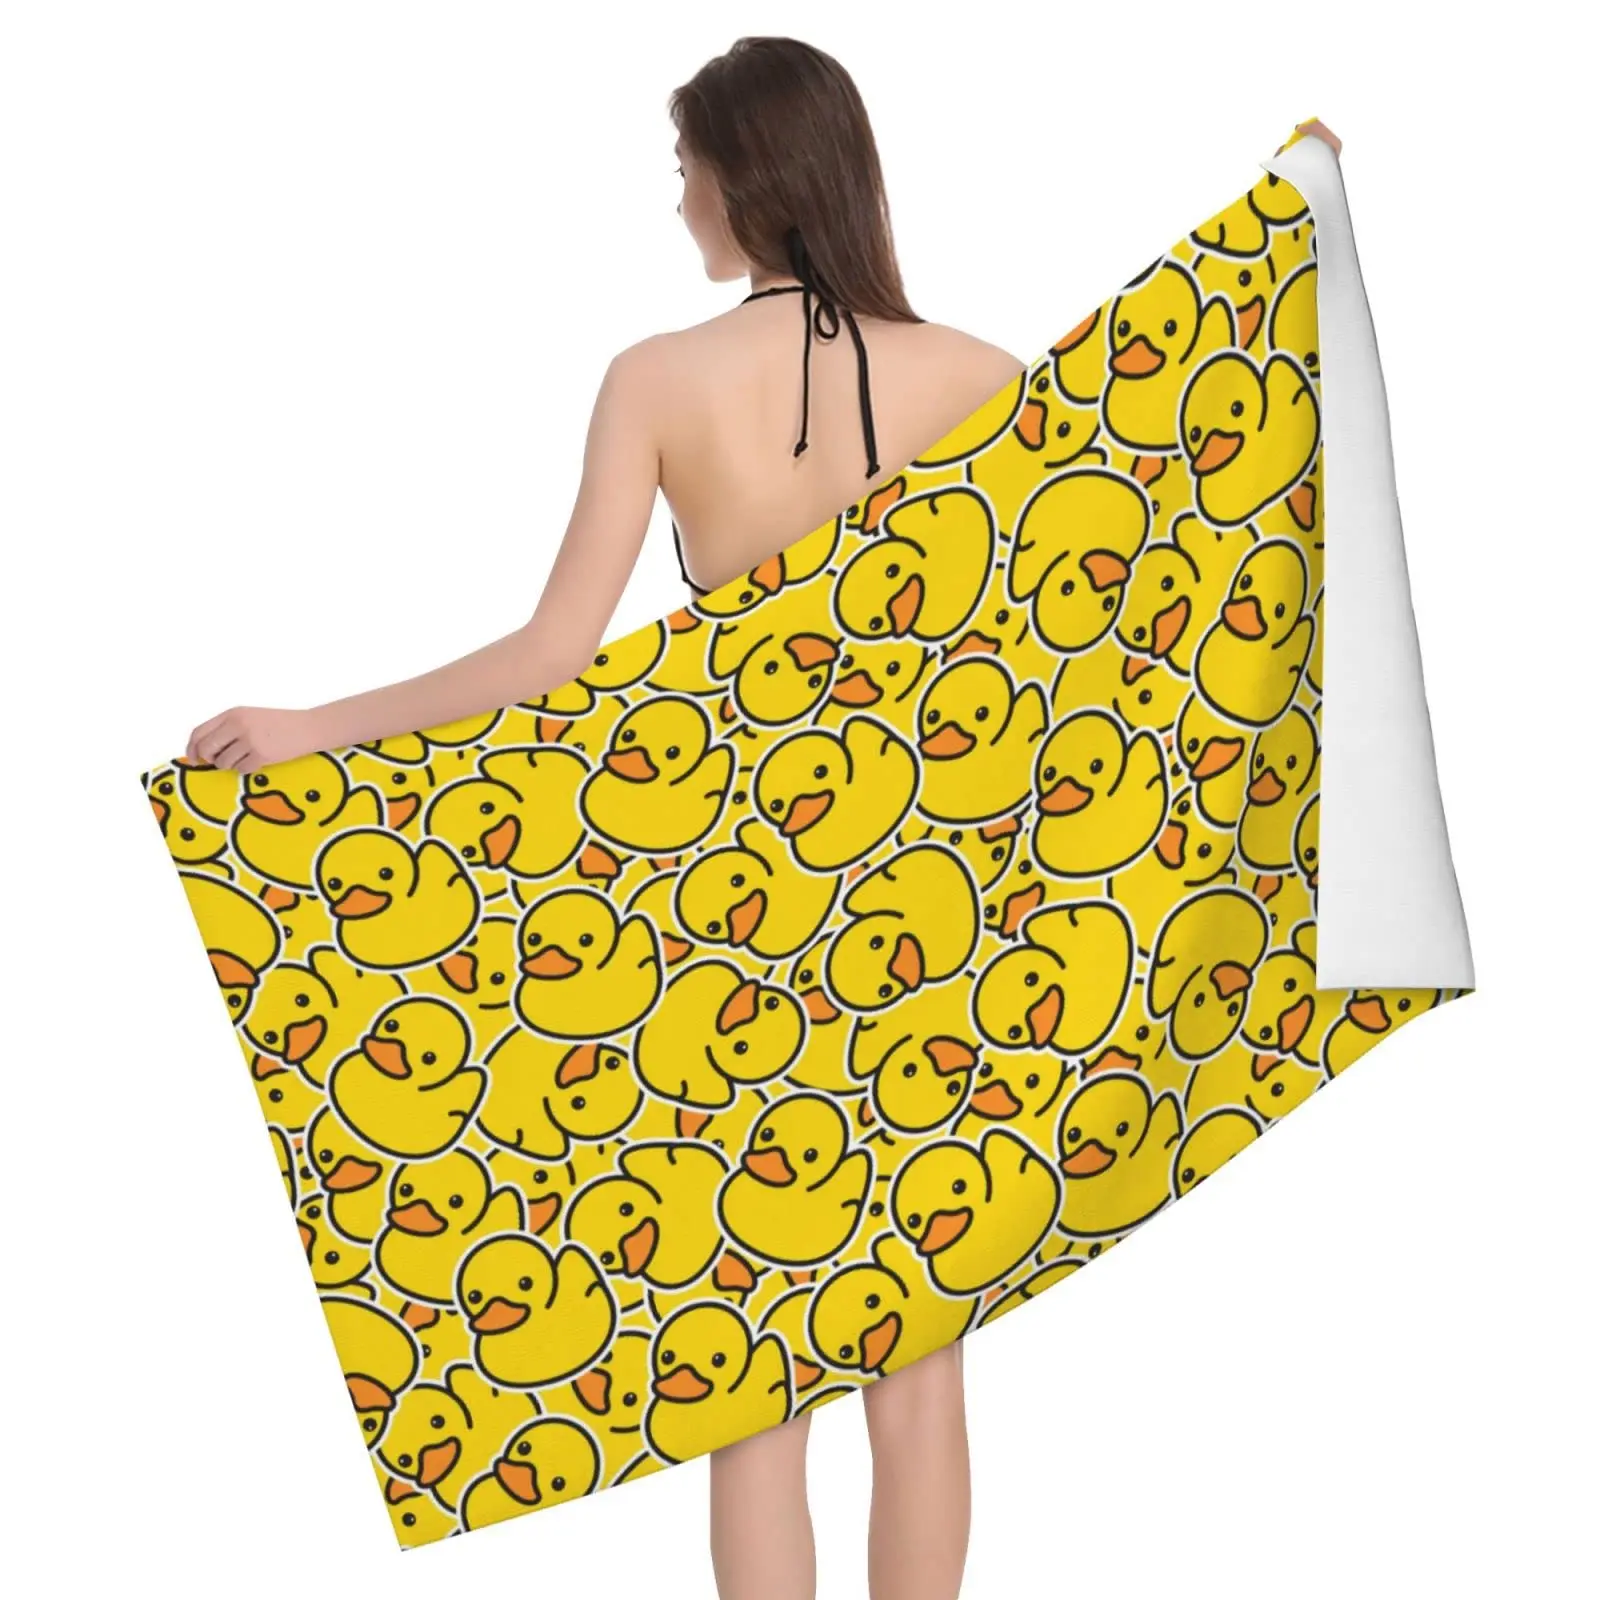 

Microfiber Cartoon Rubber Duck Beach Towel Cute Yellow Ducky Animals Bath Towels Quick Dry Towel for Pool,Shower,Travel,Sport